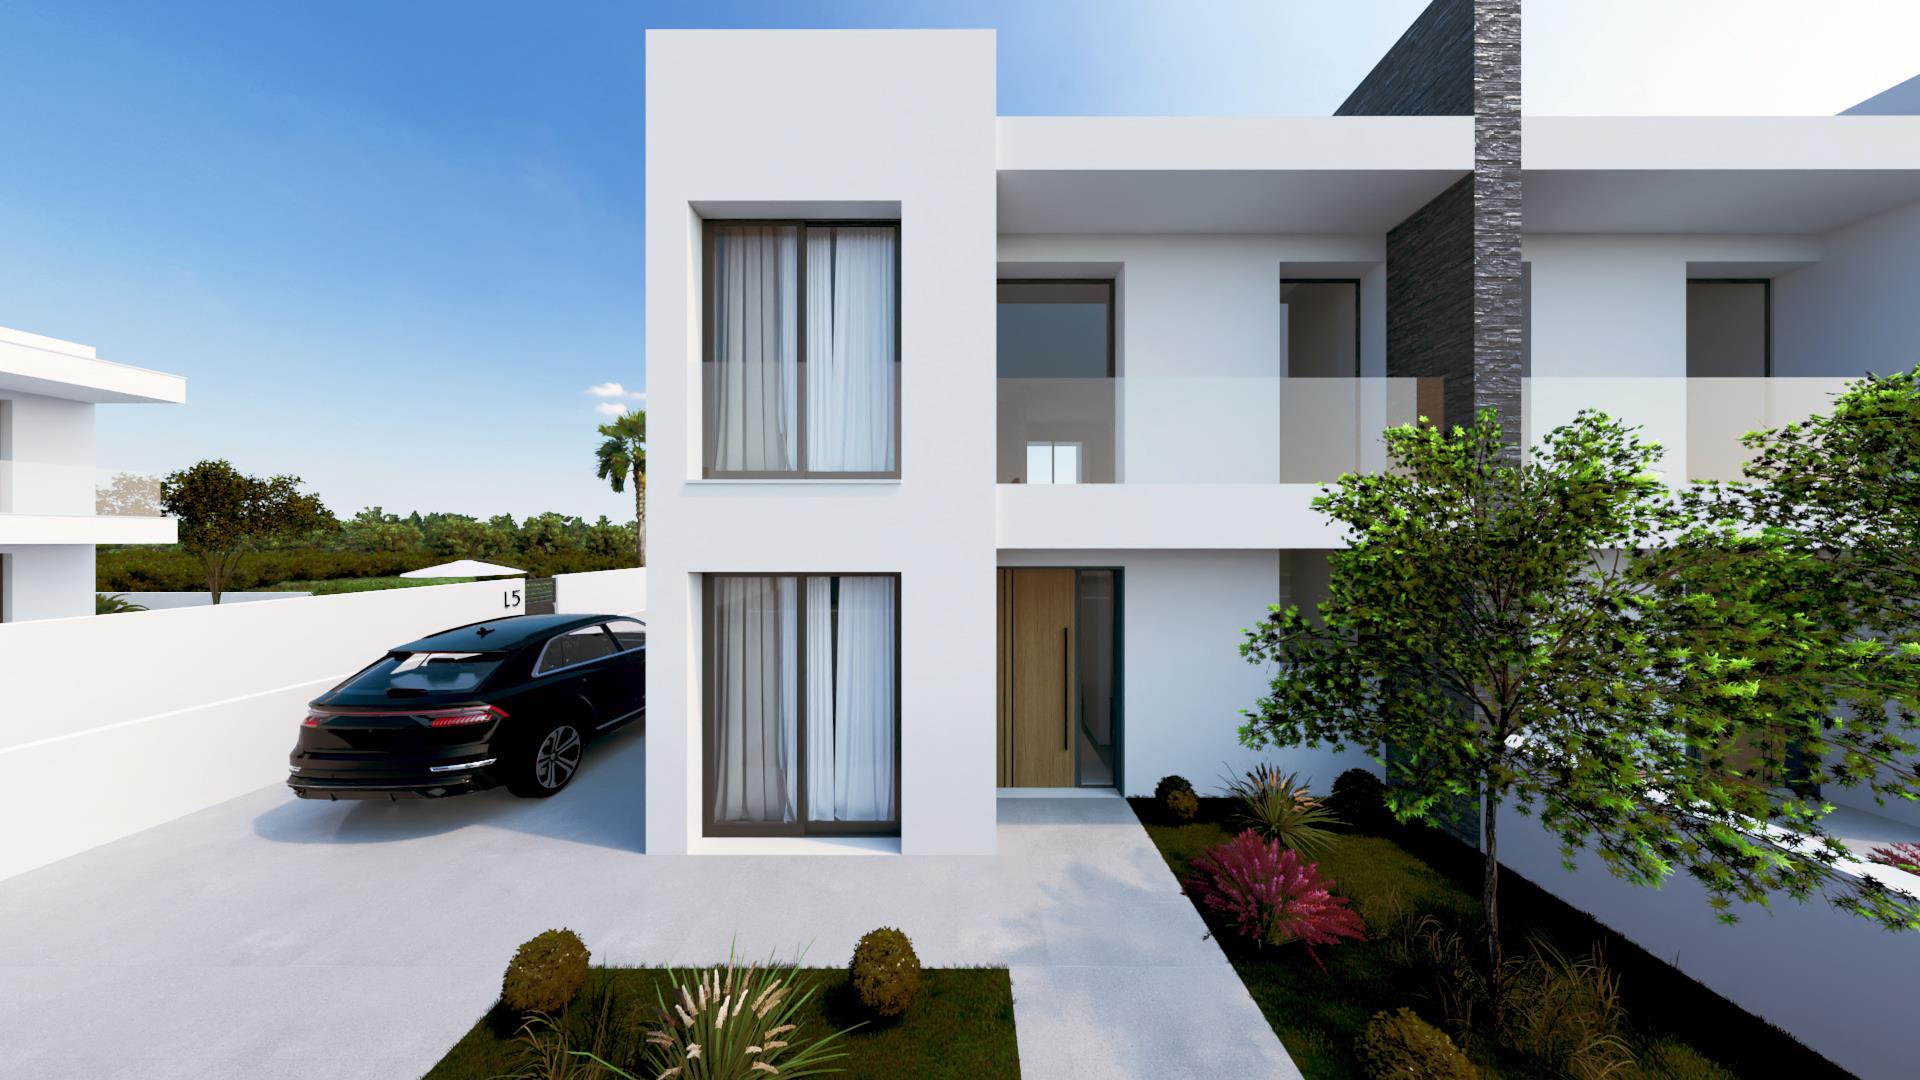 Modern semi-detached one side 4 bedroom villa with pool in the "Sorrisa o Sol" development